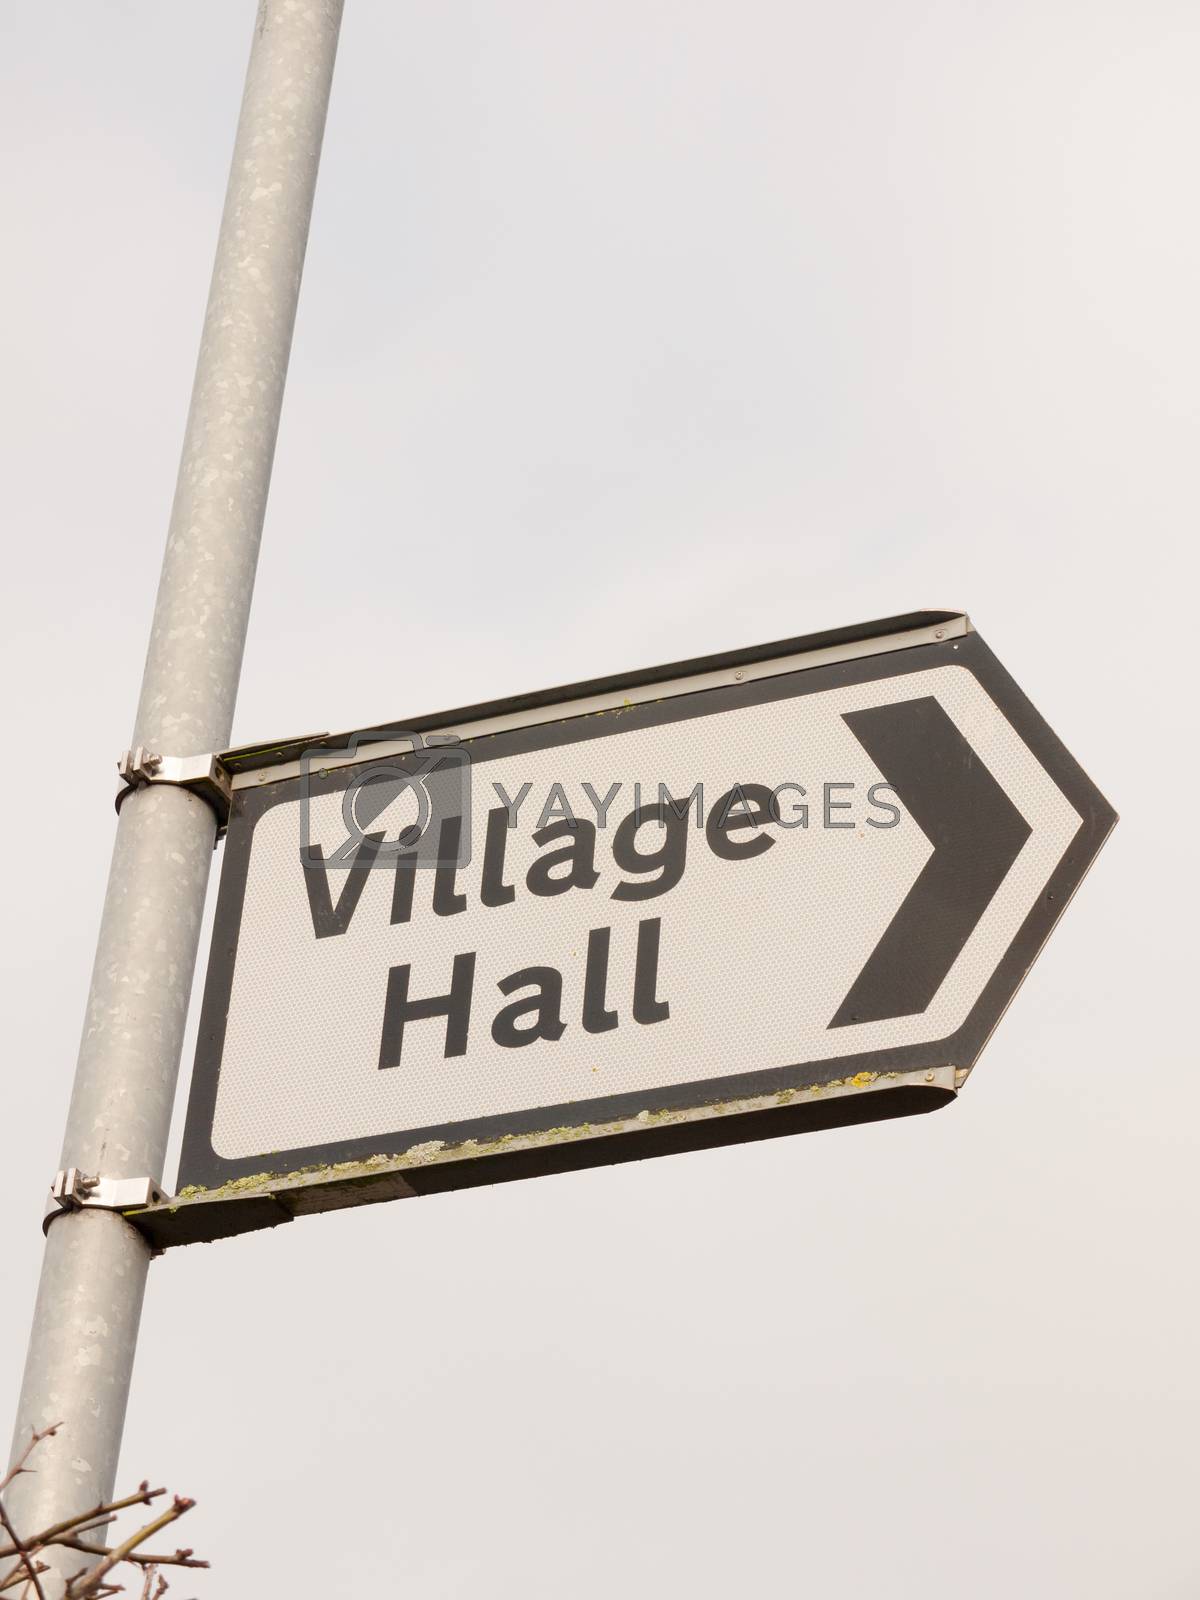 Royalty free image of white and black village hall sign post direction street by callumrc